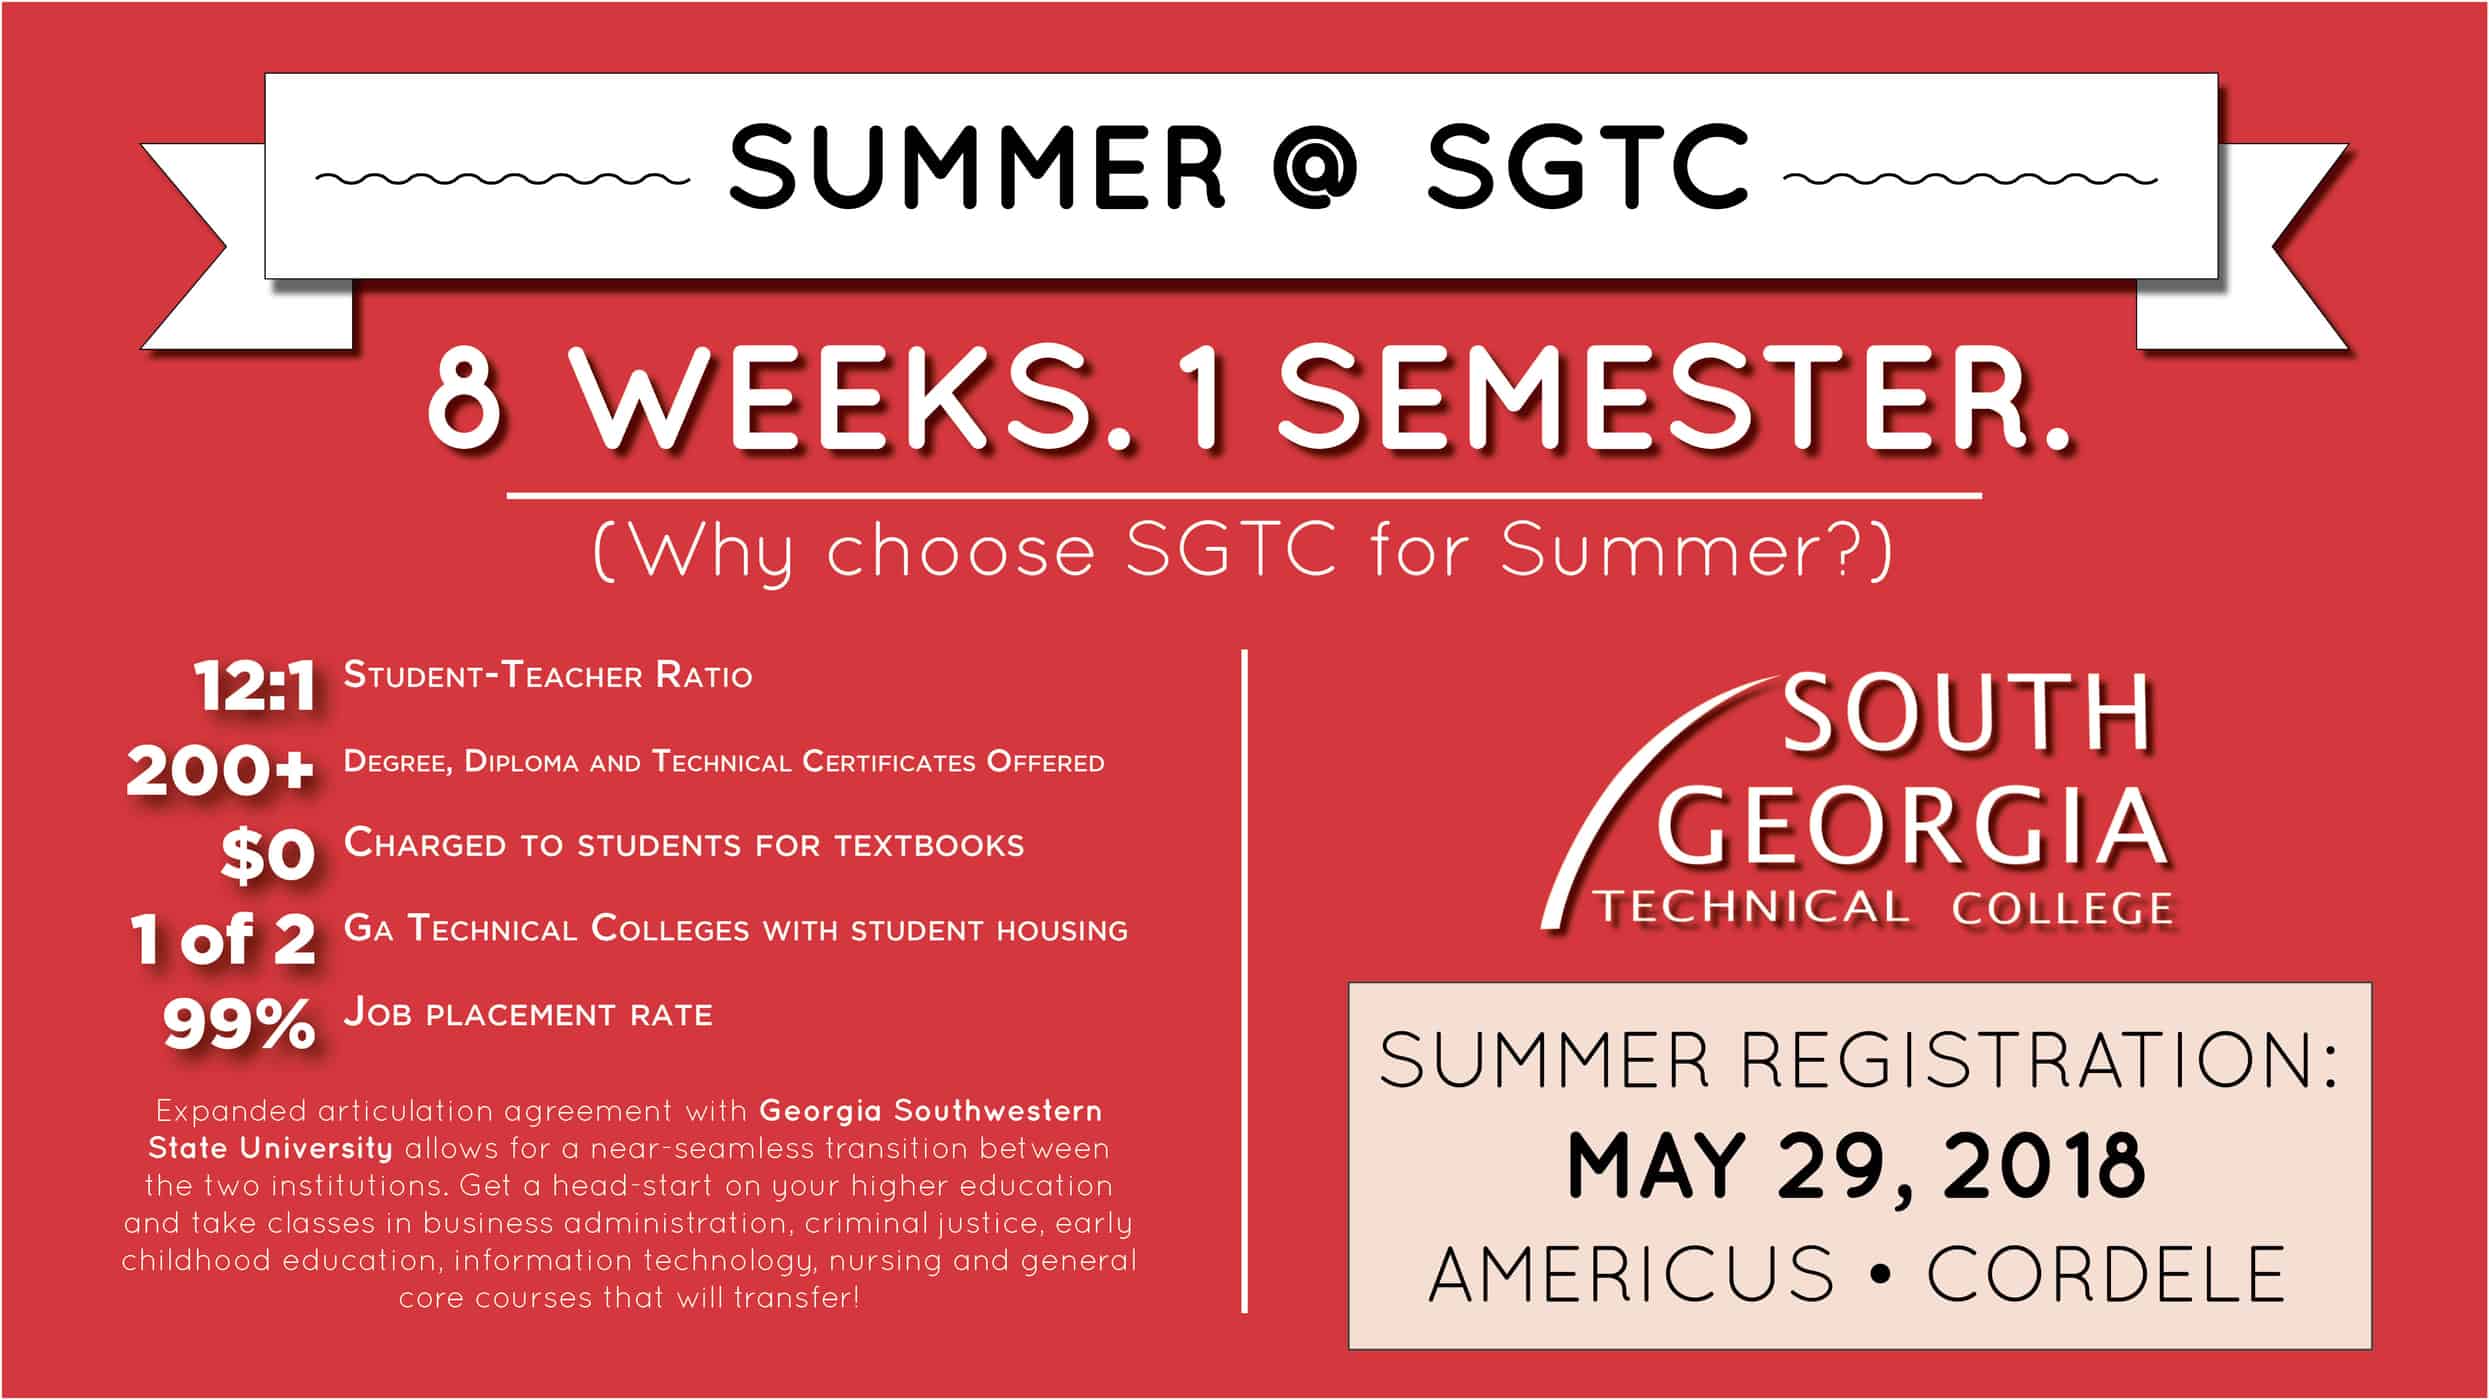 Apply Now for Summer Semester at South Georgia Technical College!